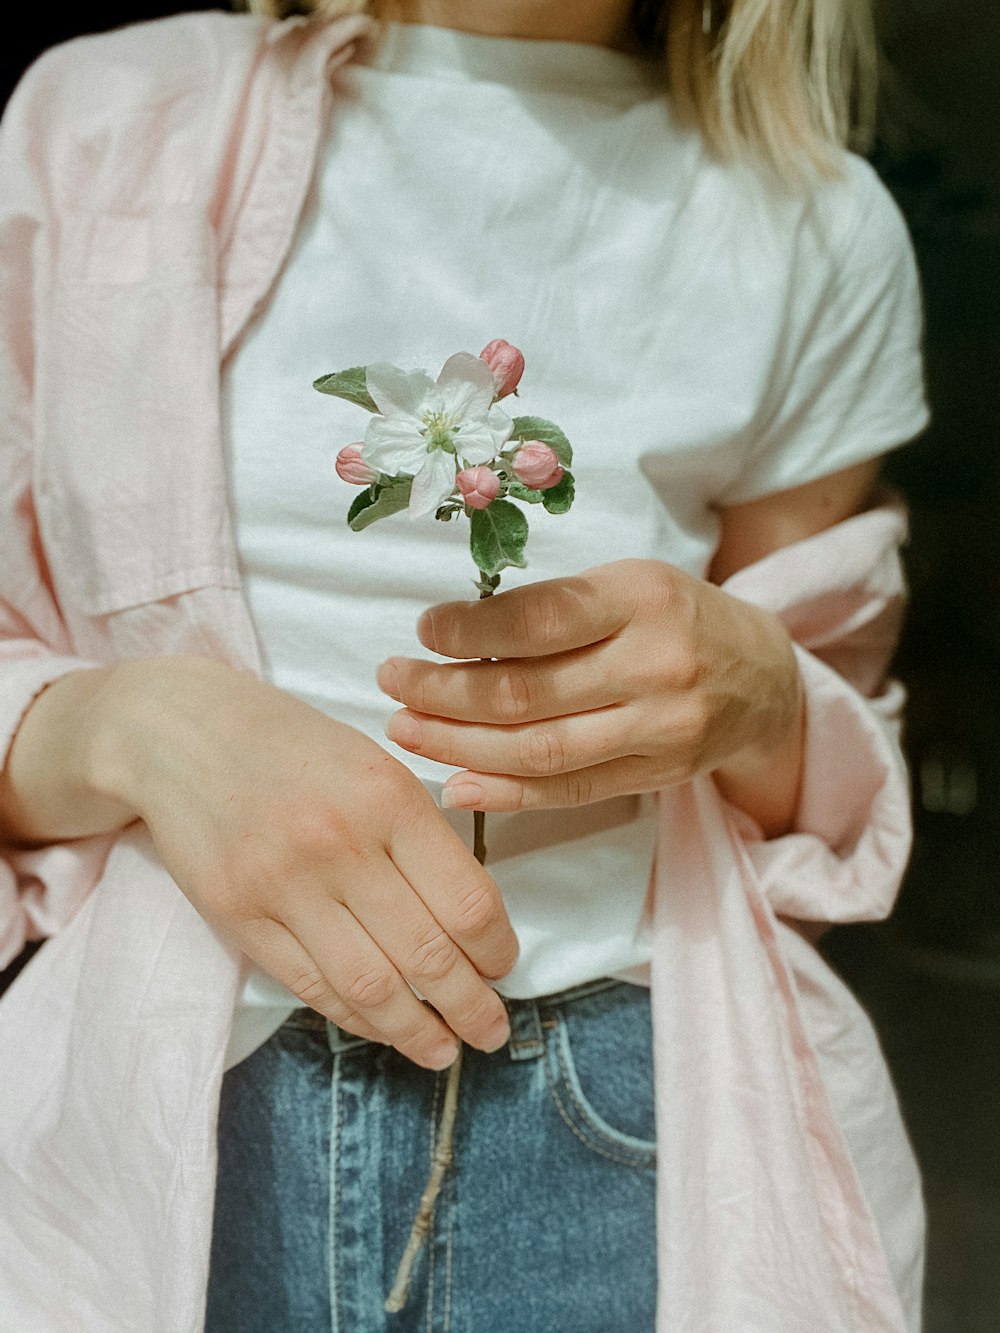 person in white button up shirt holding pink flower